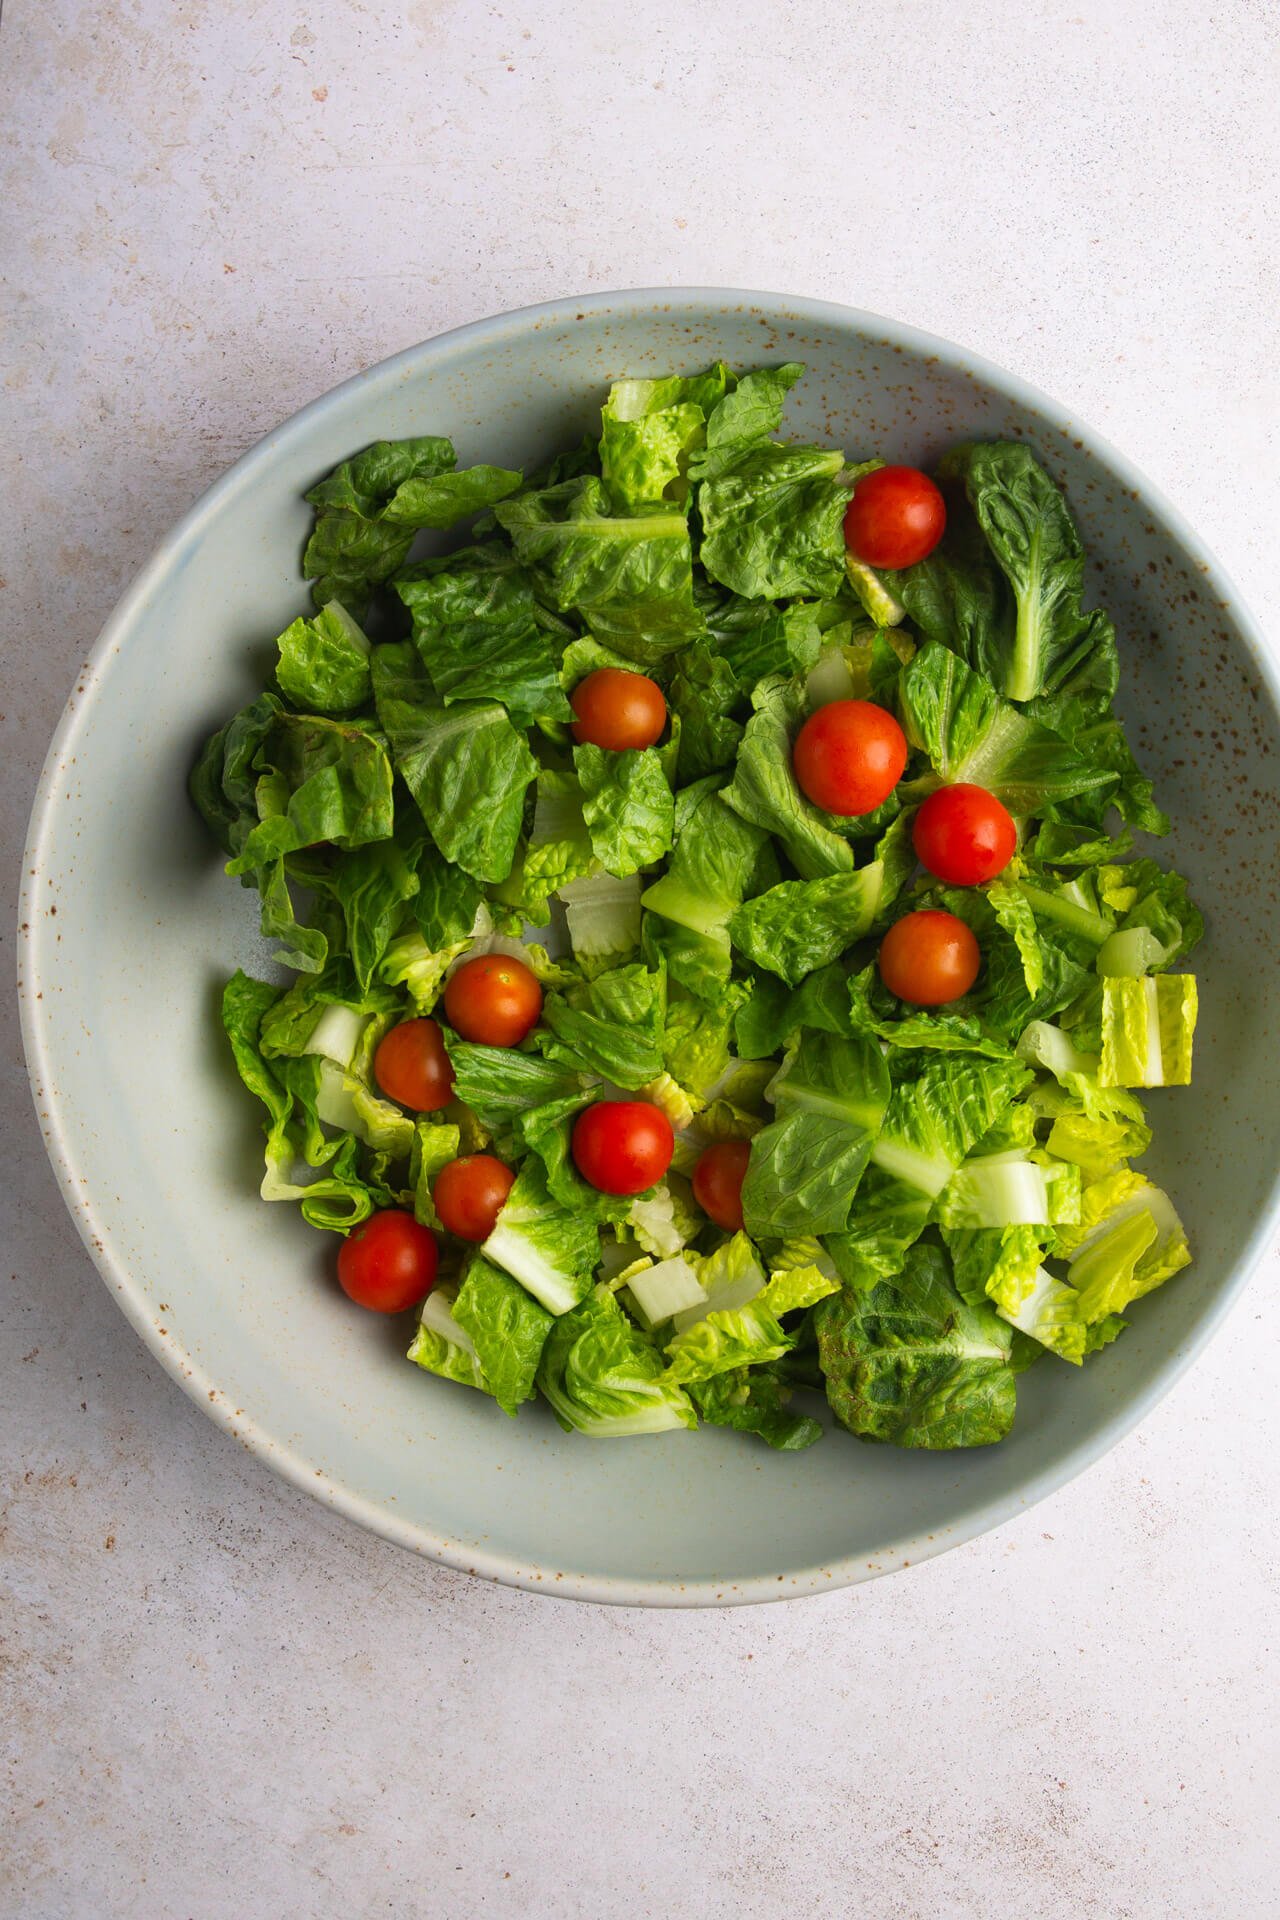 Romaine lettuce with tomatoes